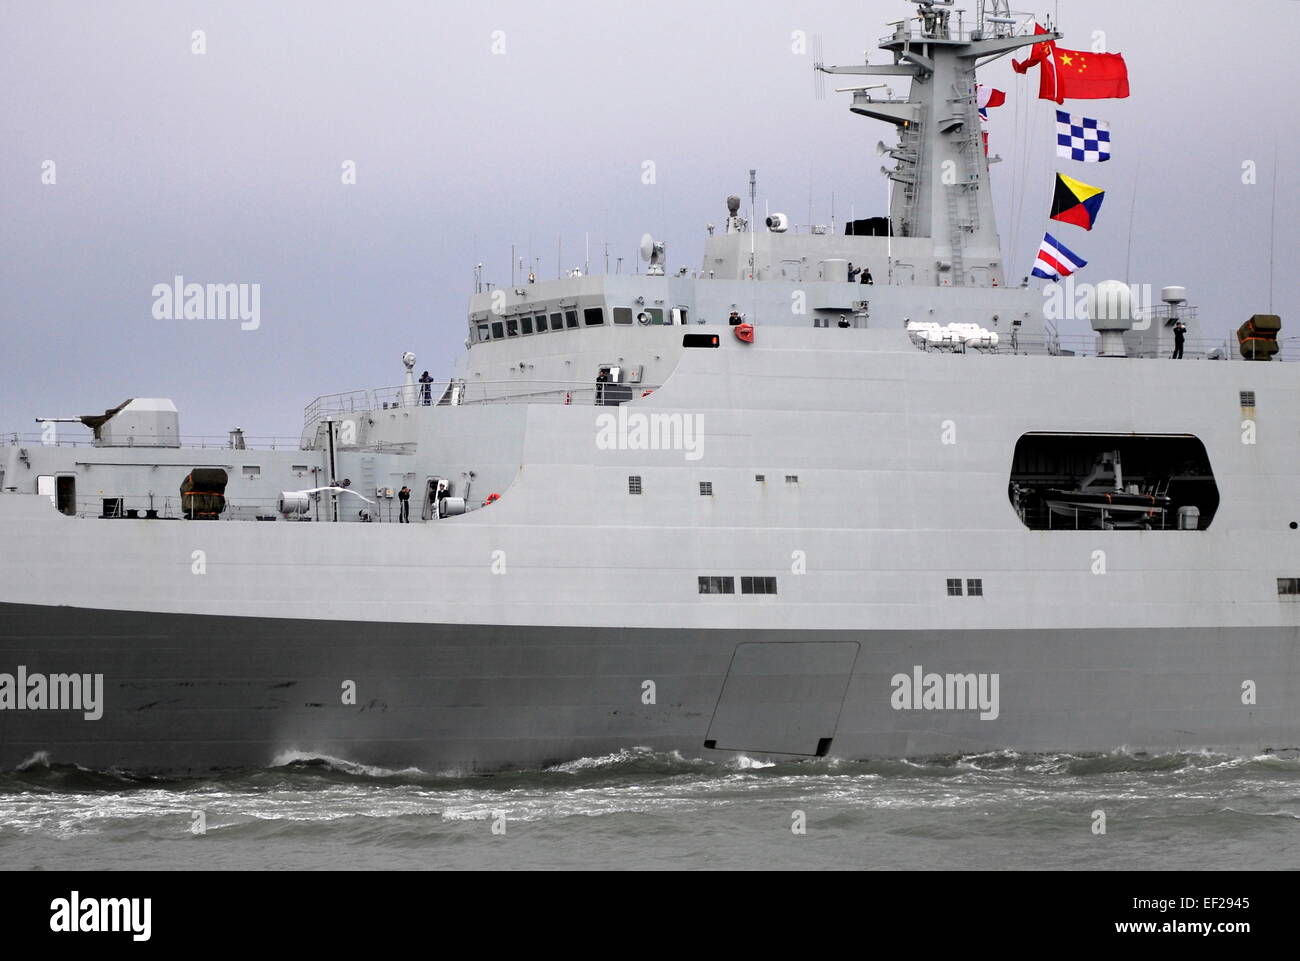 AJAXNETPHOTO. 16TH JANUARY, 2015. PORTSMOUTH, ENGLAND. - CHINA NAVY VISIT ENDS - PLAN AMPHIBIOUS TRANSPORT DOCK (P989) CHANG BAI SHAN LEAVES NAVAL BASE AFTER COURTESY VISIT, EN ROUTE TO KIEL, GERMANY. PHOTO:TONY HOLLAND/AJAX REF:DTH151601 2017 Stock Photo